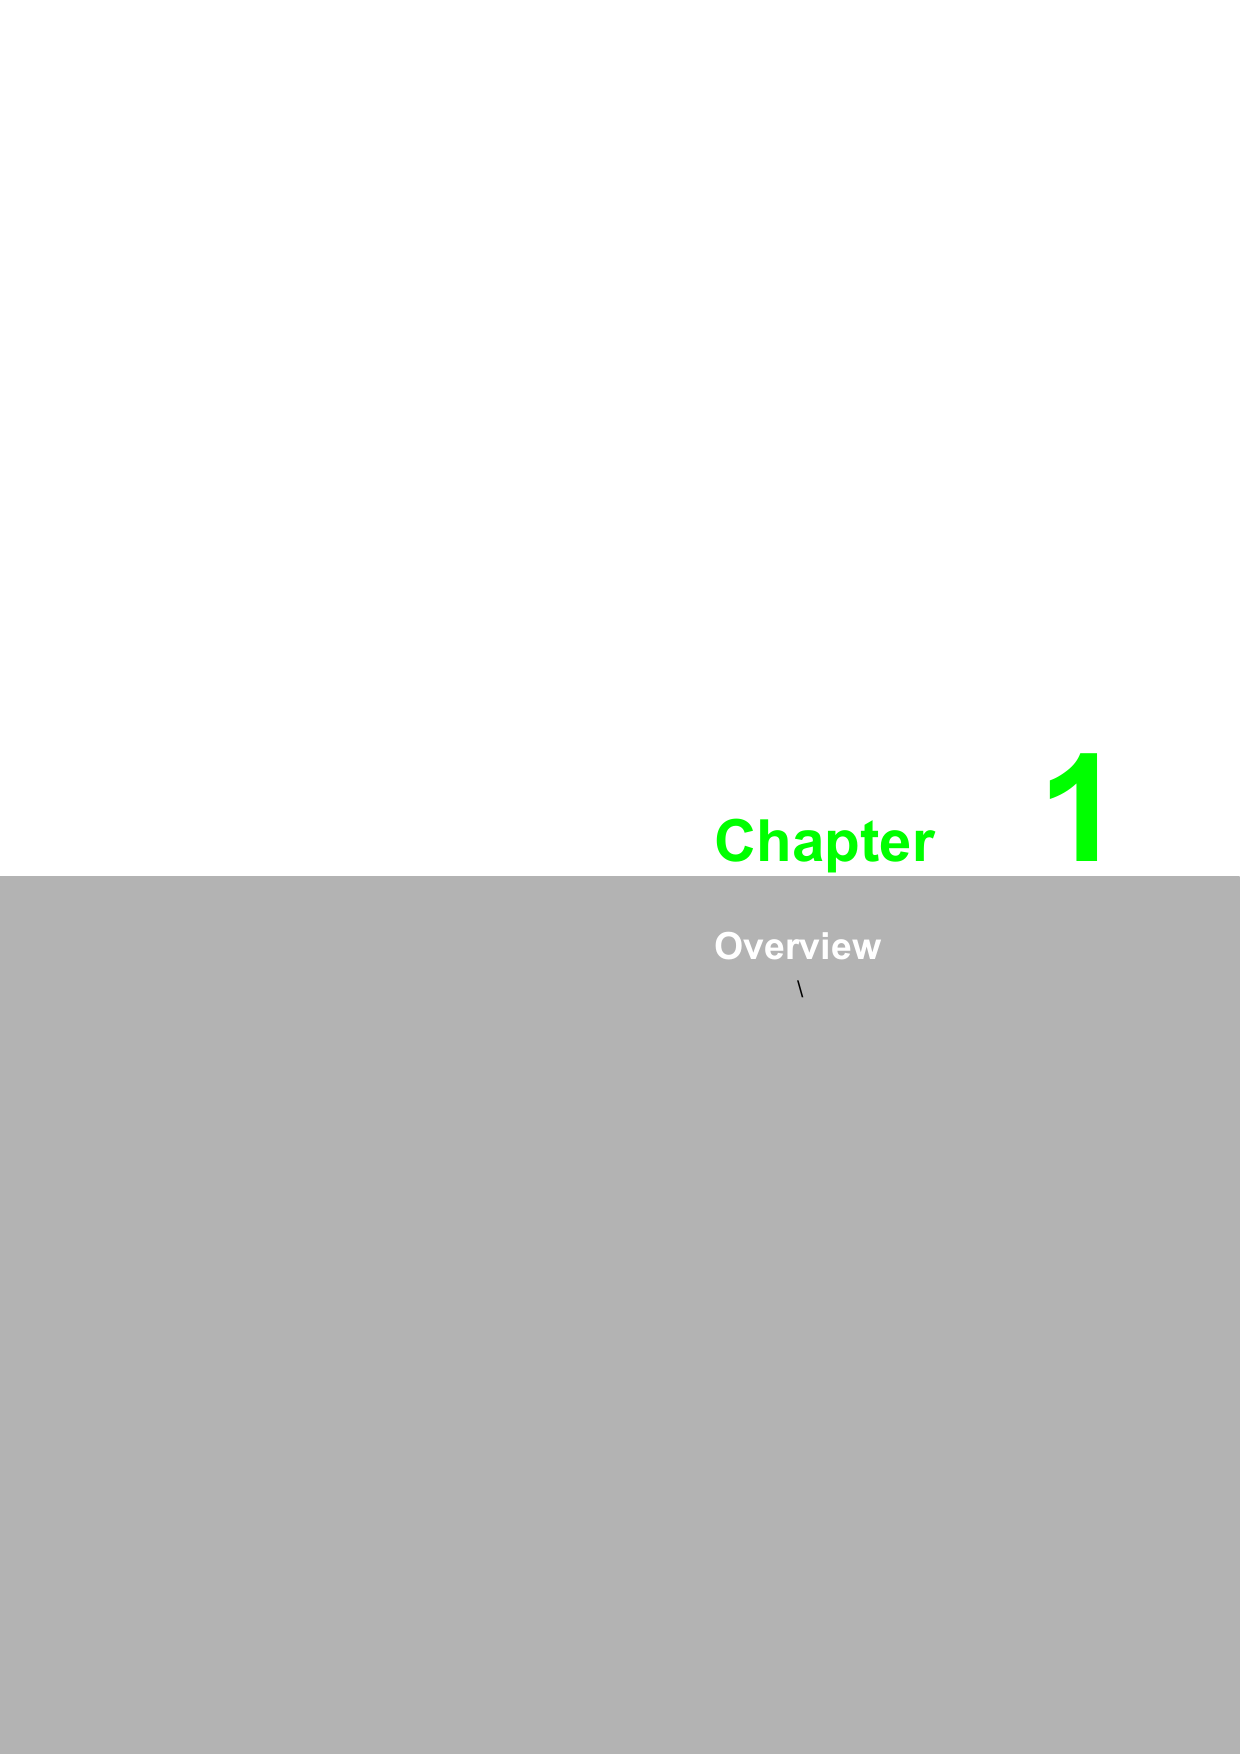 Chapter 1Overview\